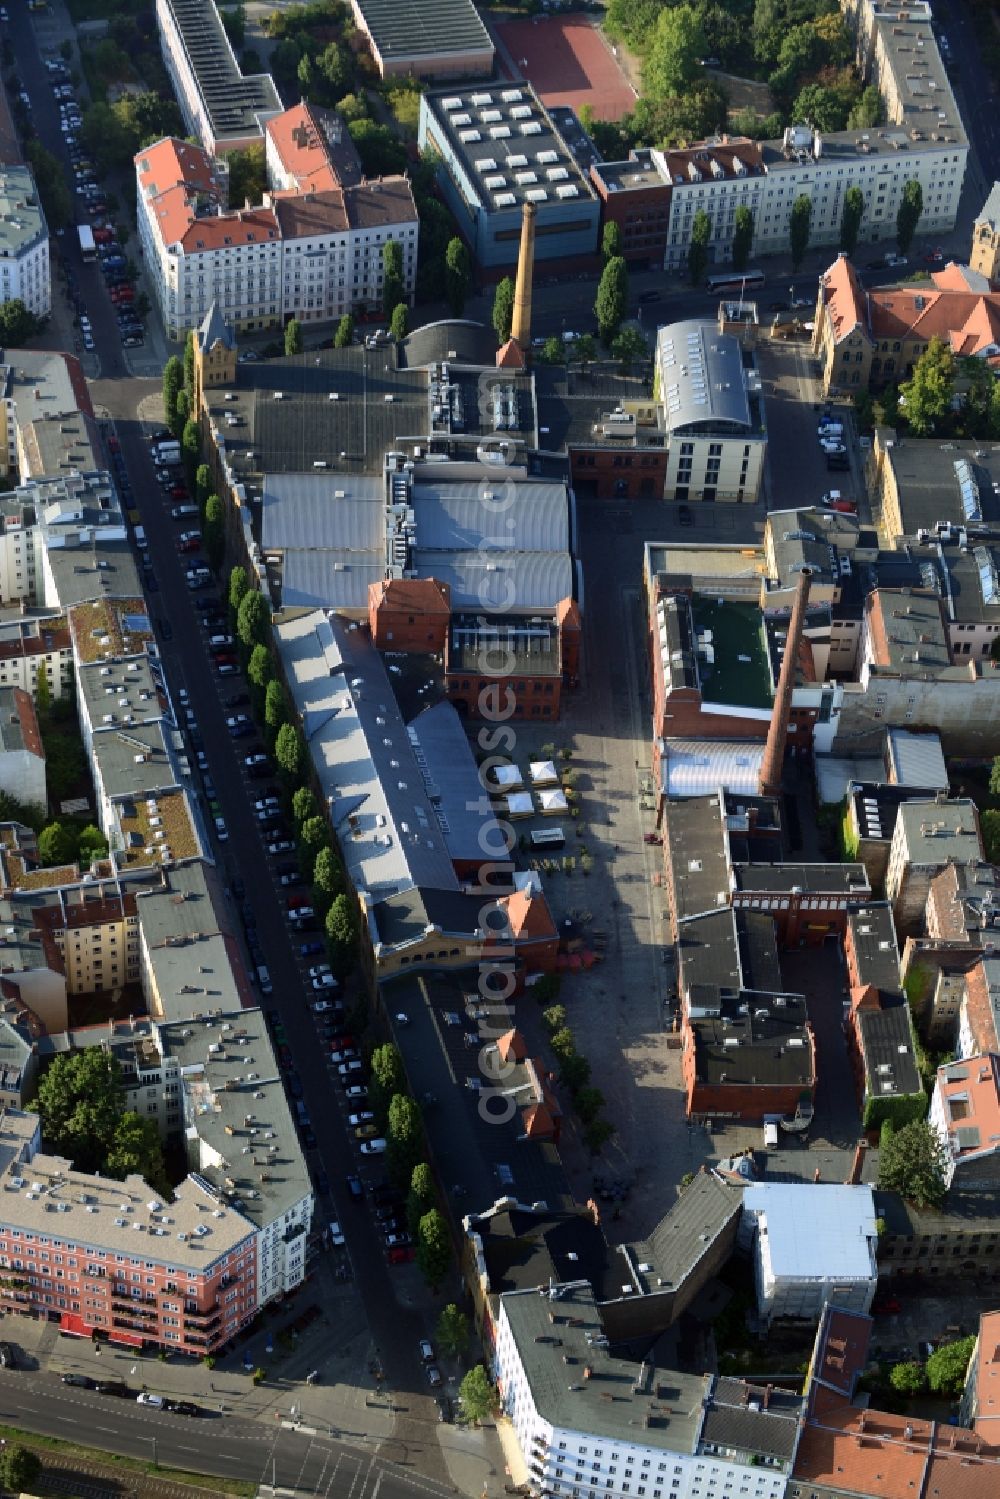 Berlin Prenzlauer Berg from the bird's eye view: Kulturbrauerei Berlin evolved from a brewery to a cultural place. It contains a cinema, theatre, rehearsal rooms, and venues like the so called Kesselhaus or Frannz Klub and much more. It is situated near Schoenhauser Allee